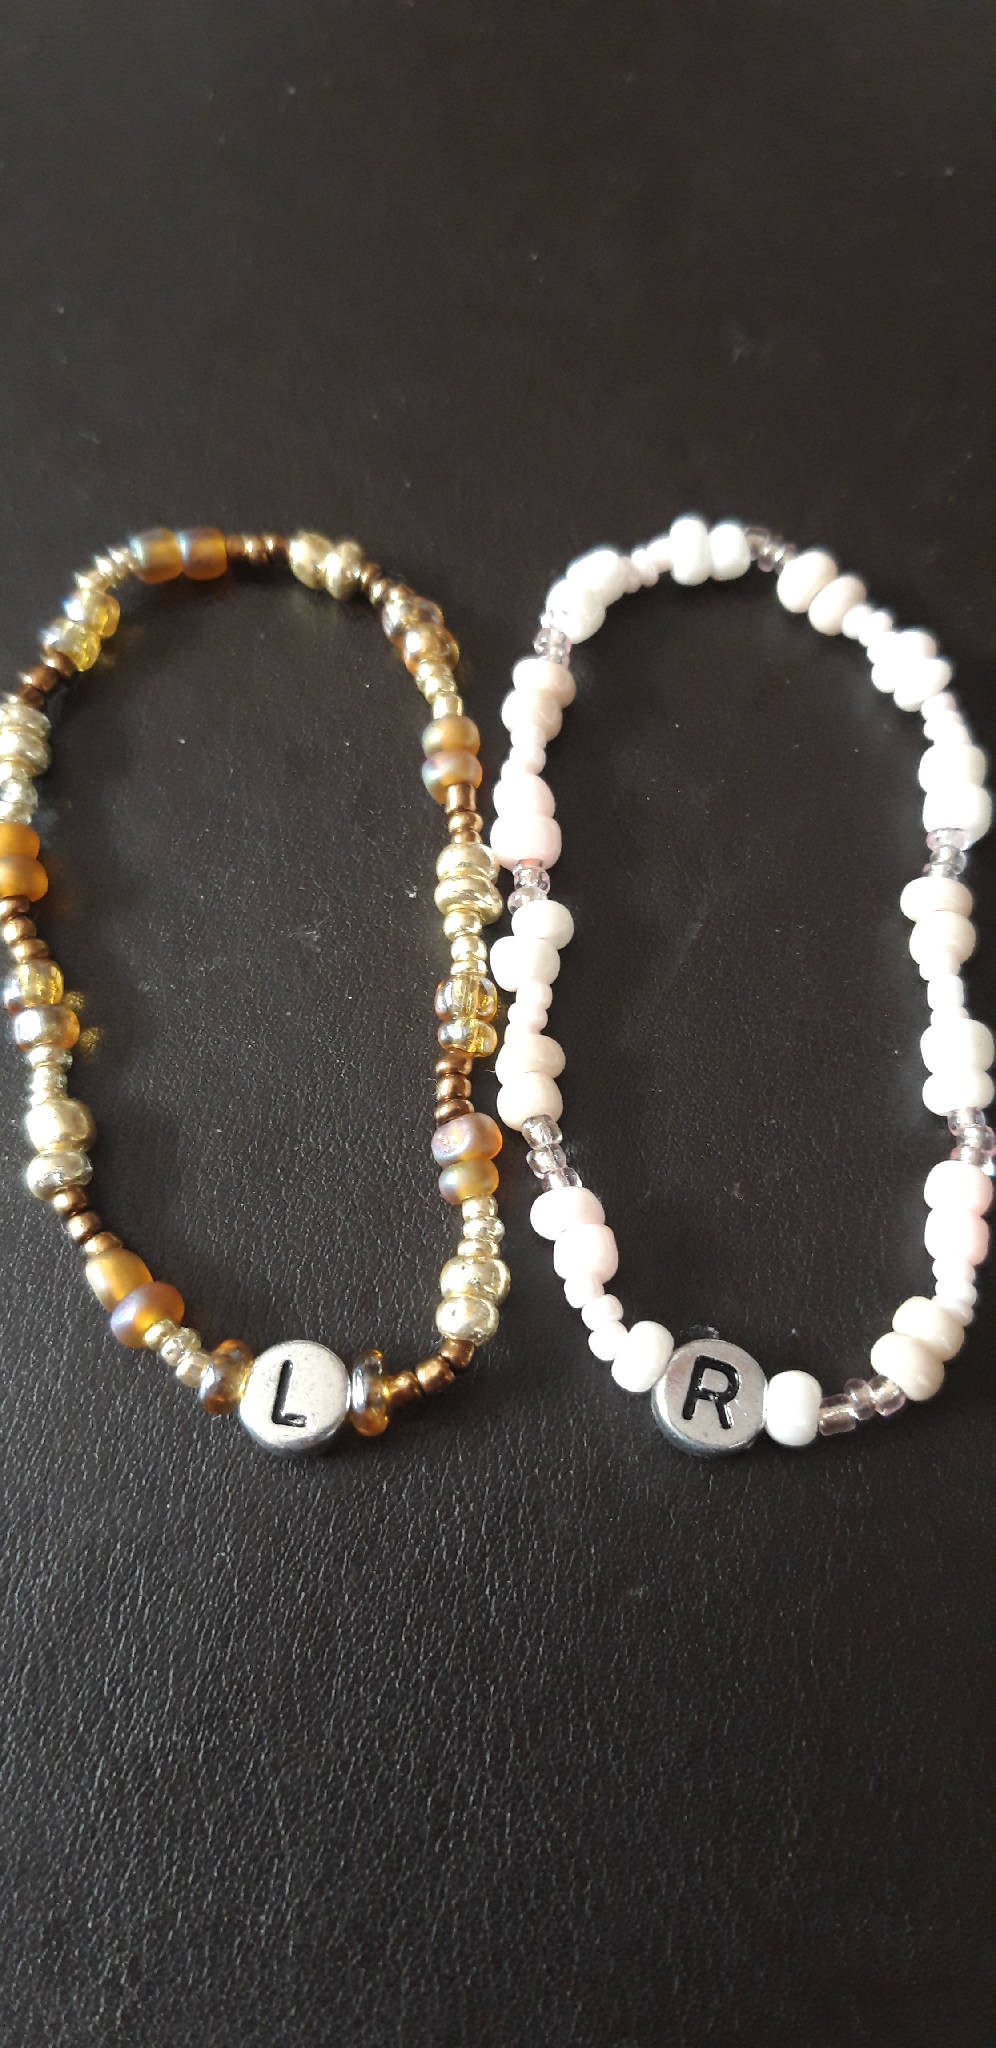 Adult left and right bracelets